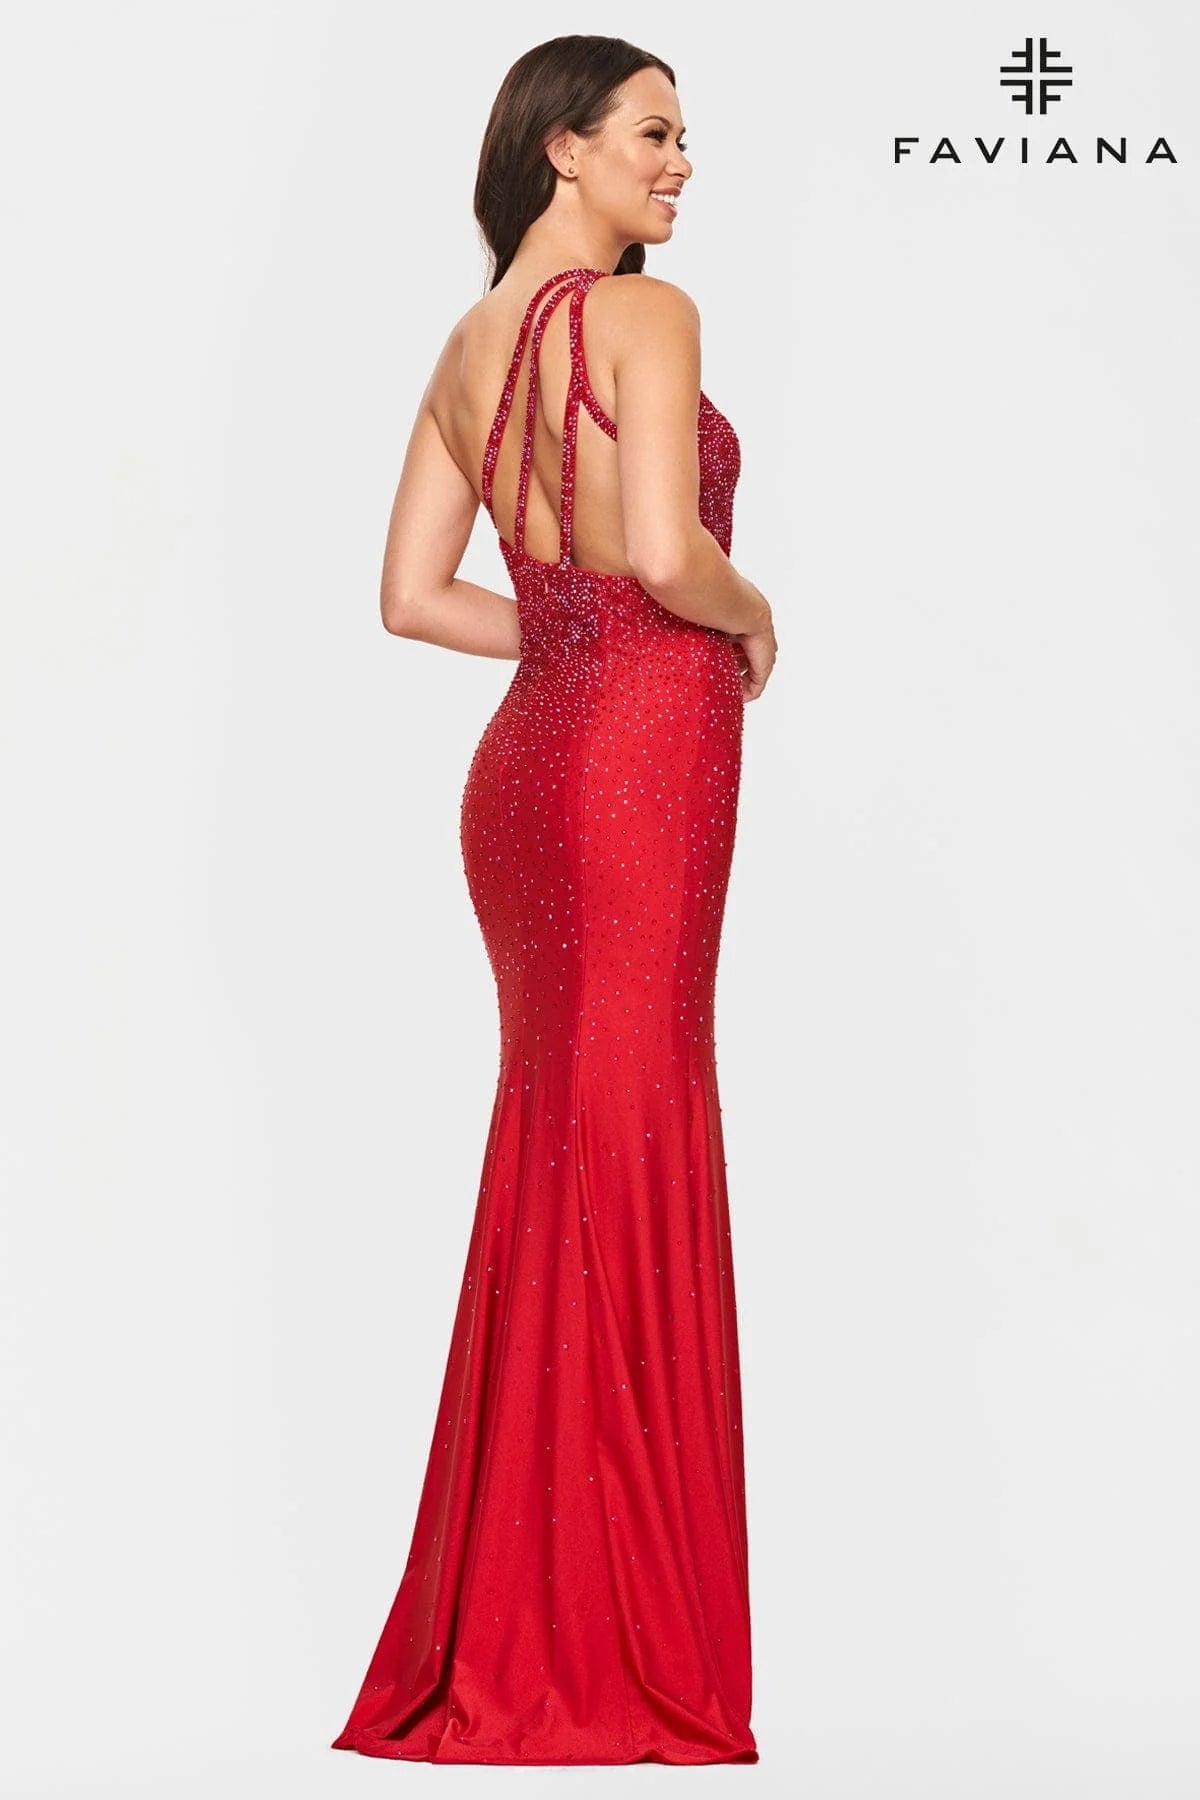 Red Beaded One Shoulder Long Dress With Strappy Back And Leg Slit